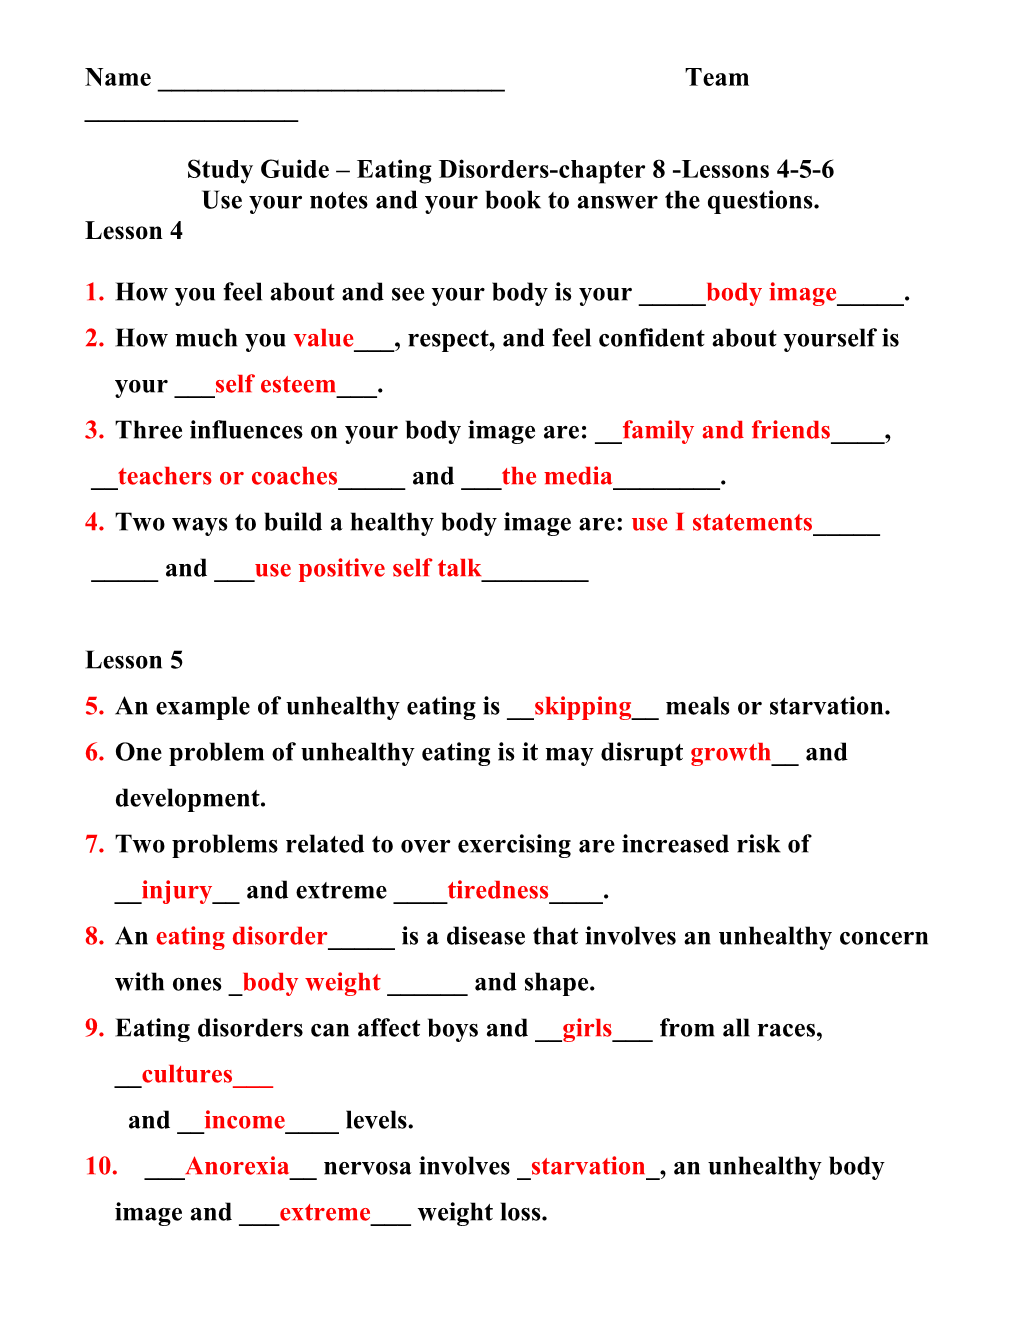 Study Guide Eating Disorders-Chapter 8 -Lessons 4-5-6